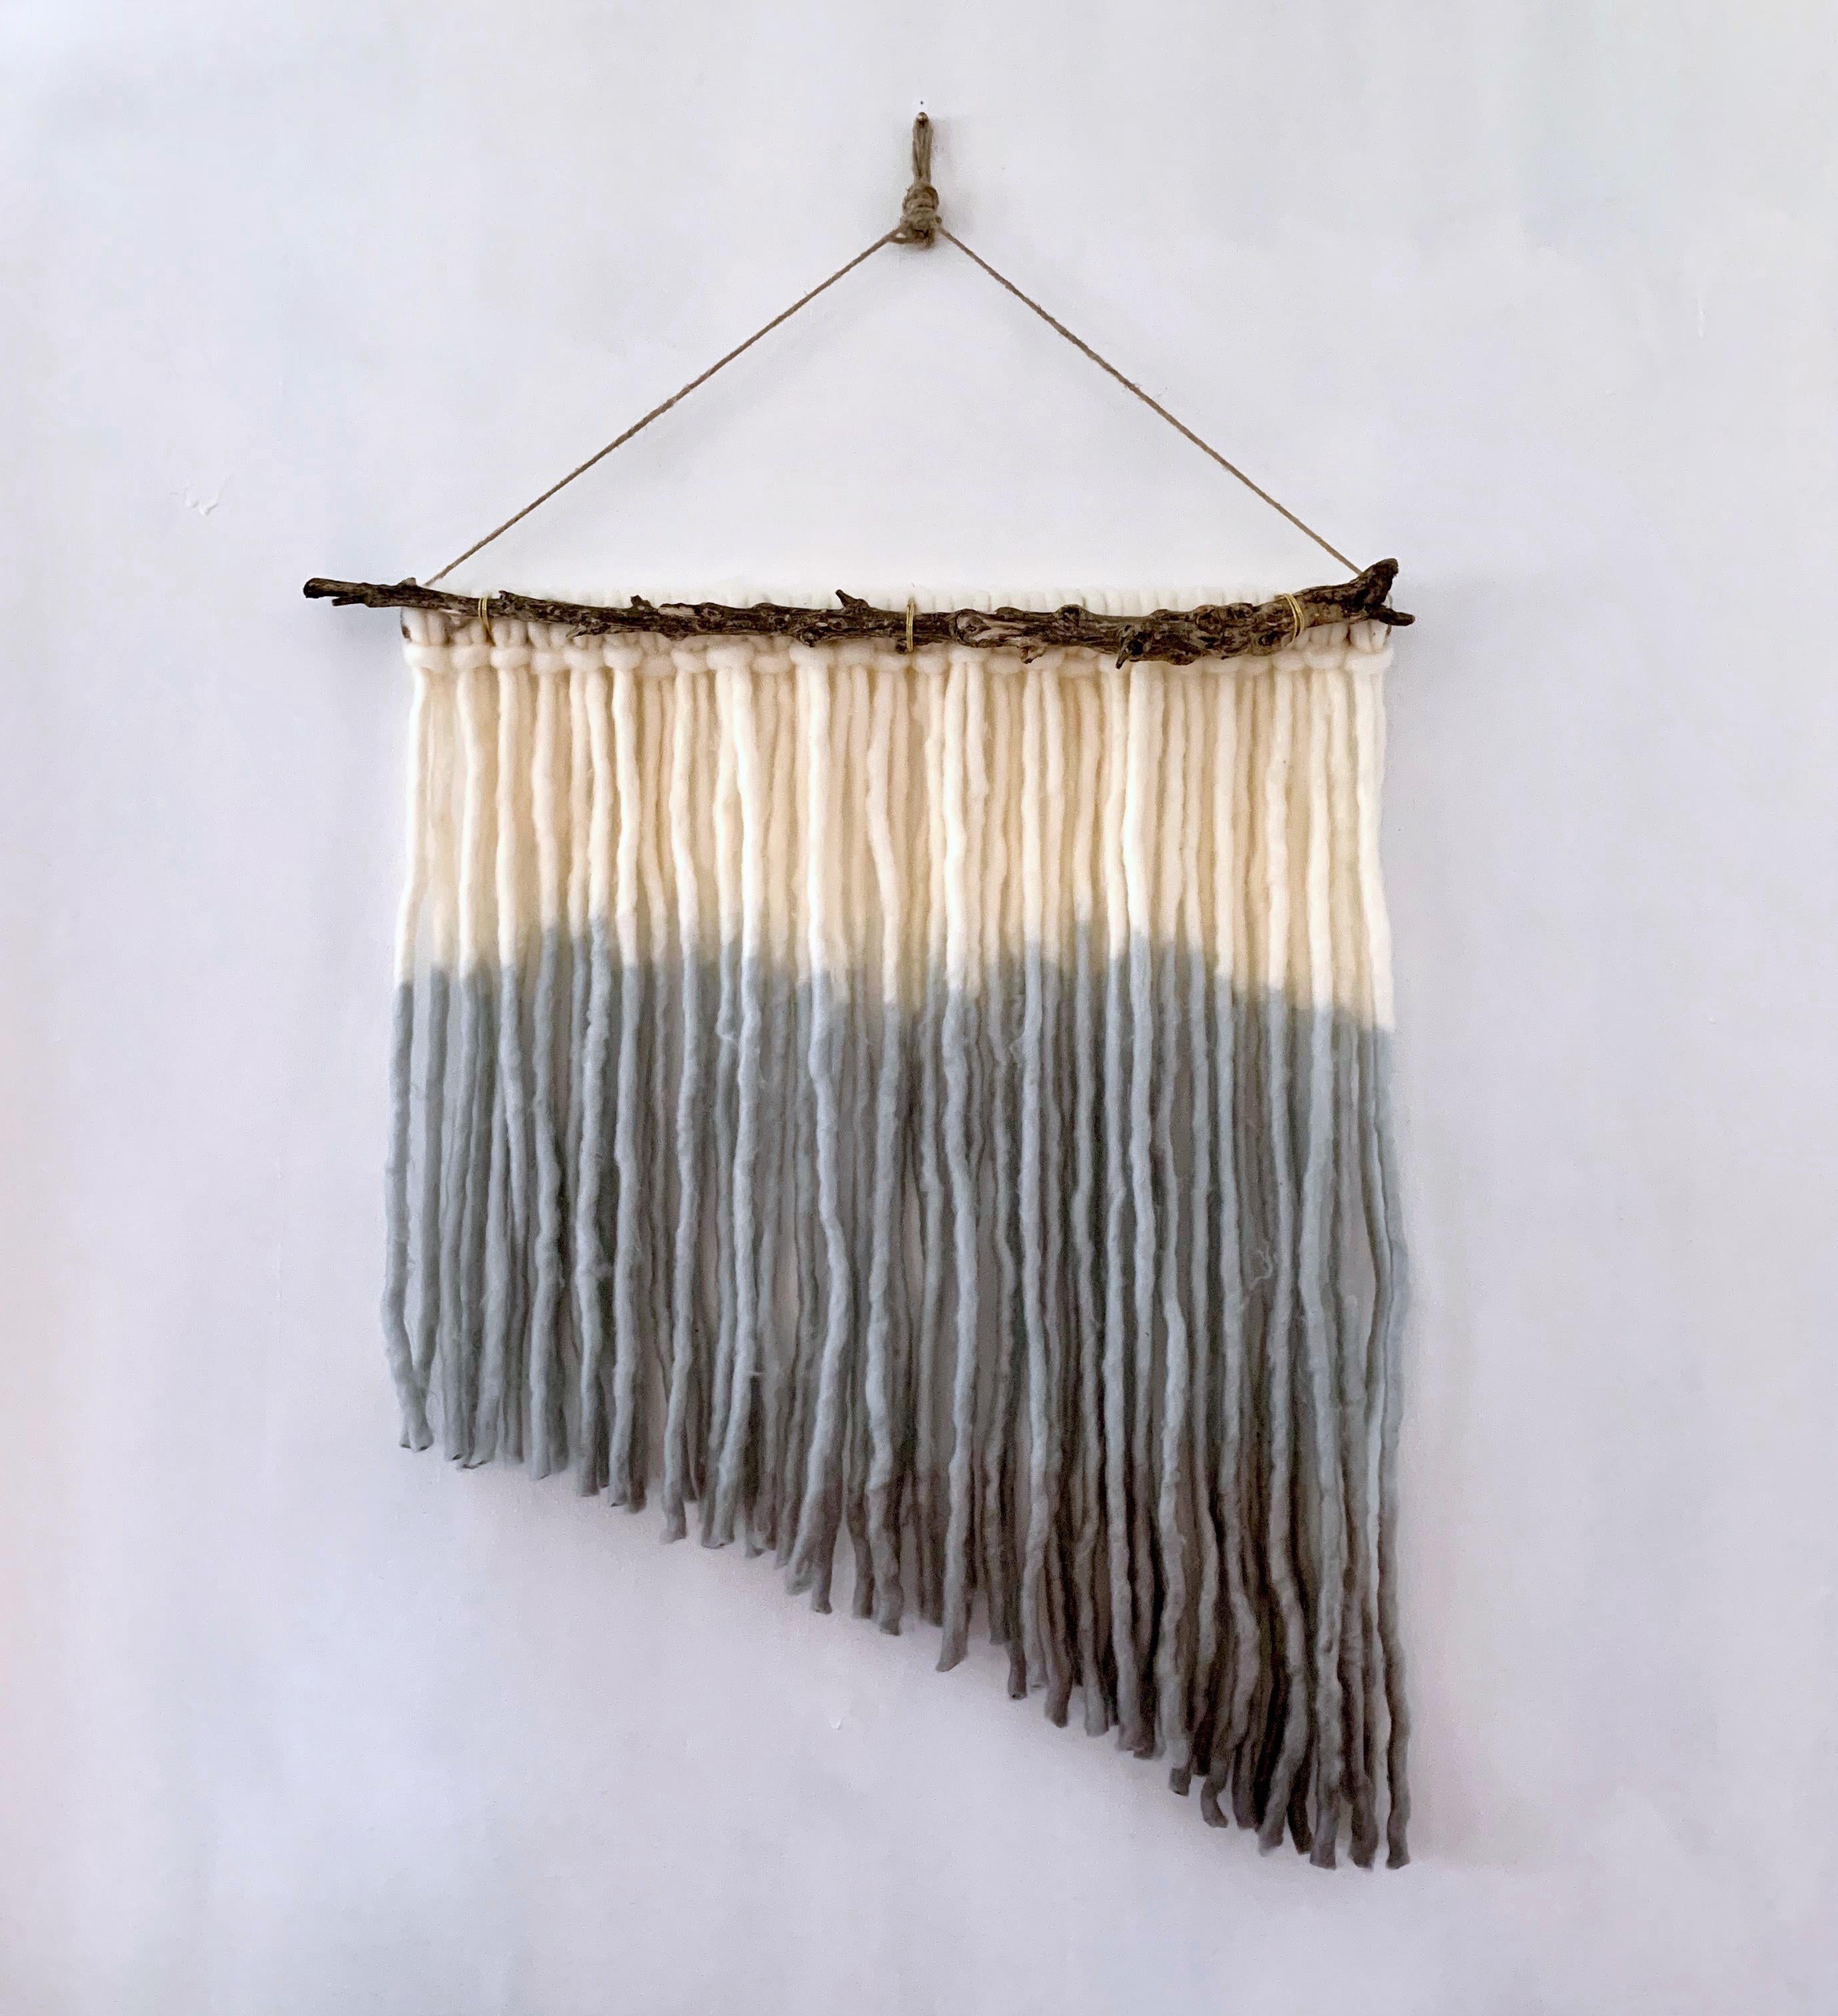 By the Shore, 2020, hand dyed Alpaca wool, wire, jute decorative wall hanging - Art by Jacie Jane D'Agostino